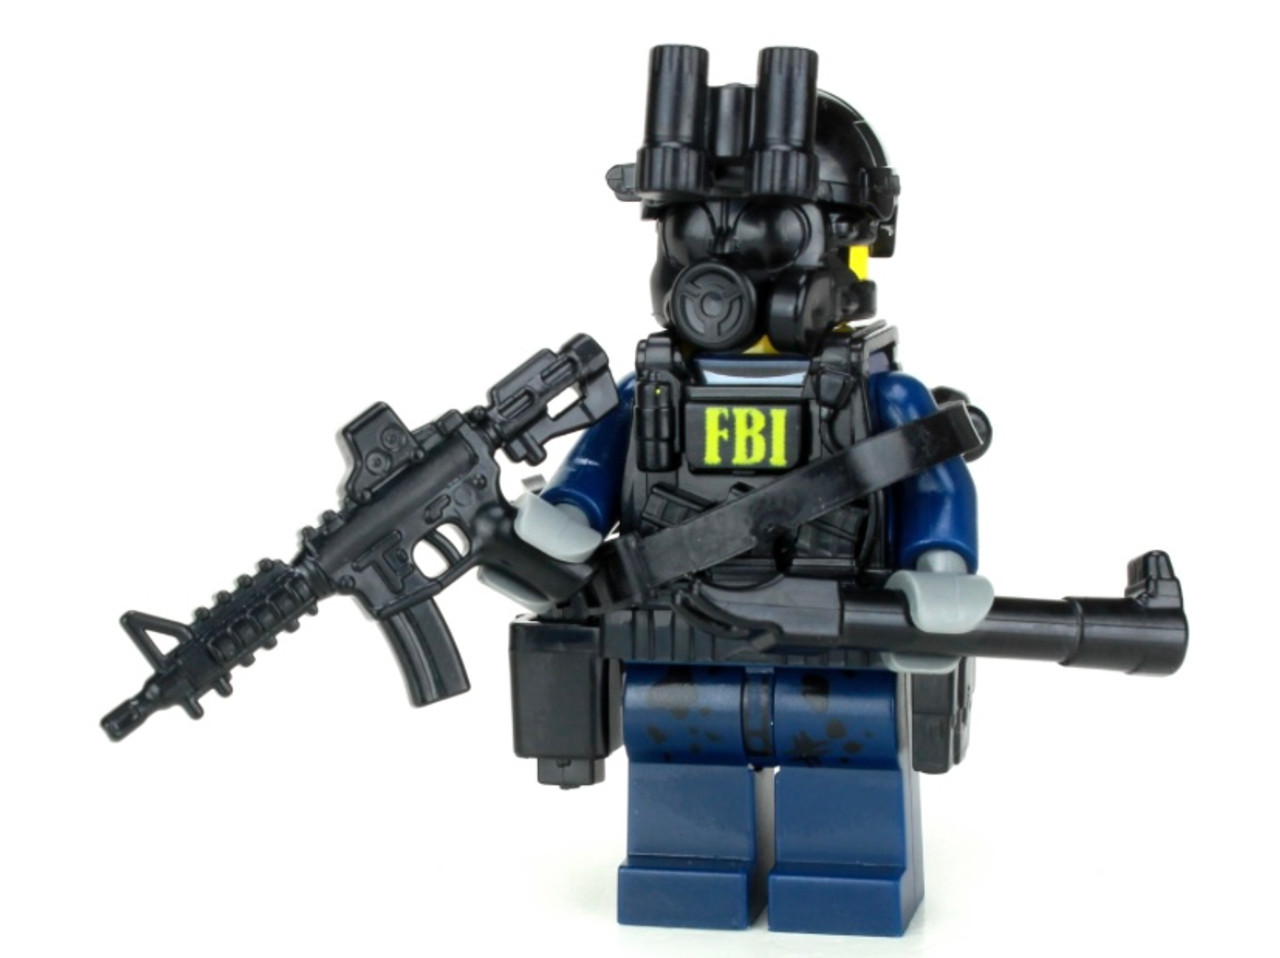 Best of LEGO SWAT Officers  Lego police, Lego soldiers, Lego army